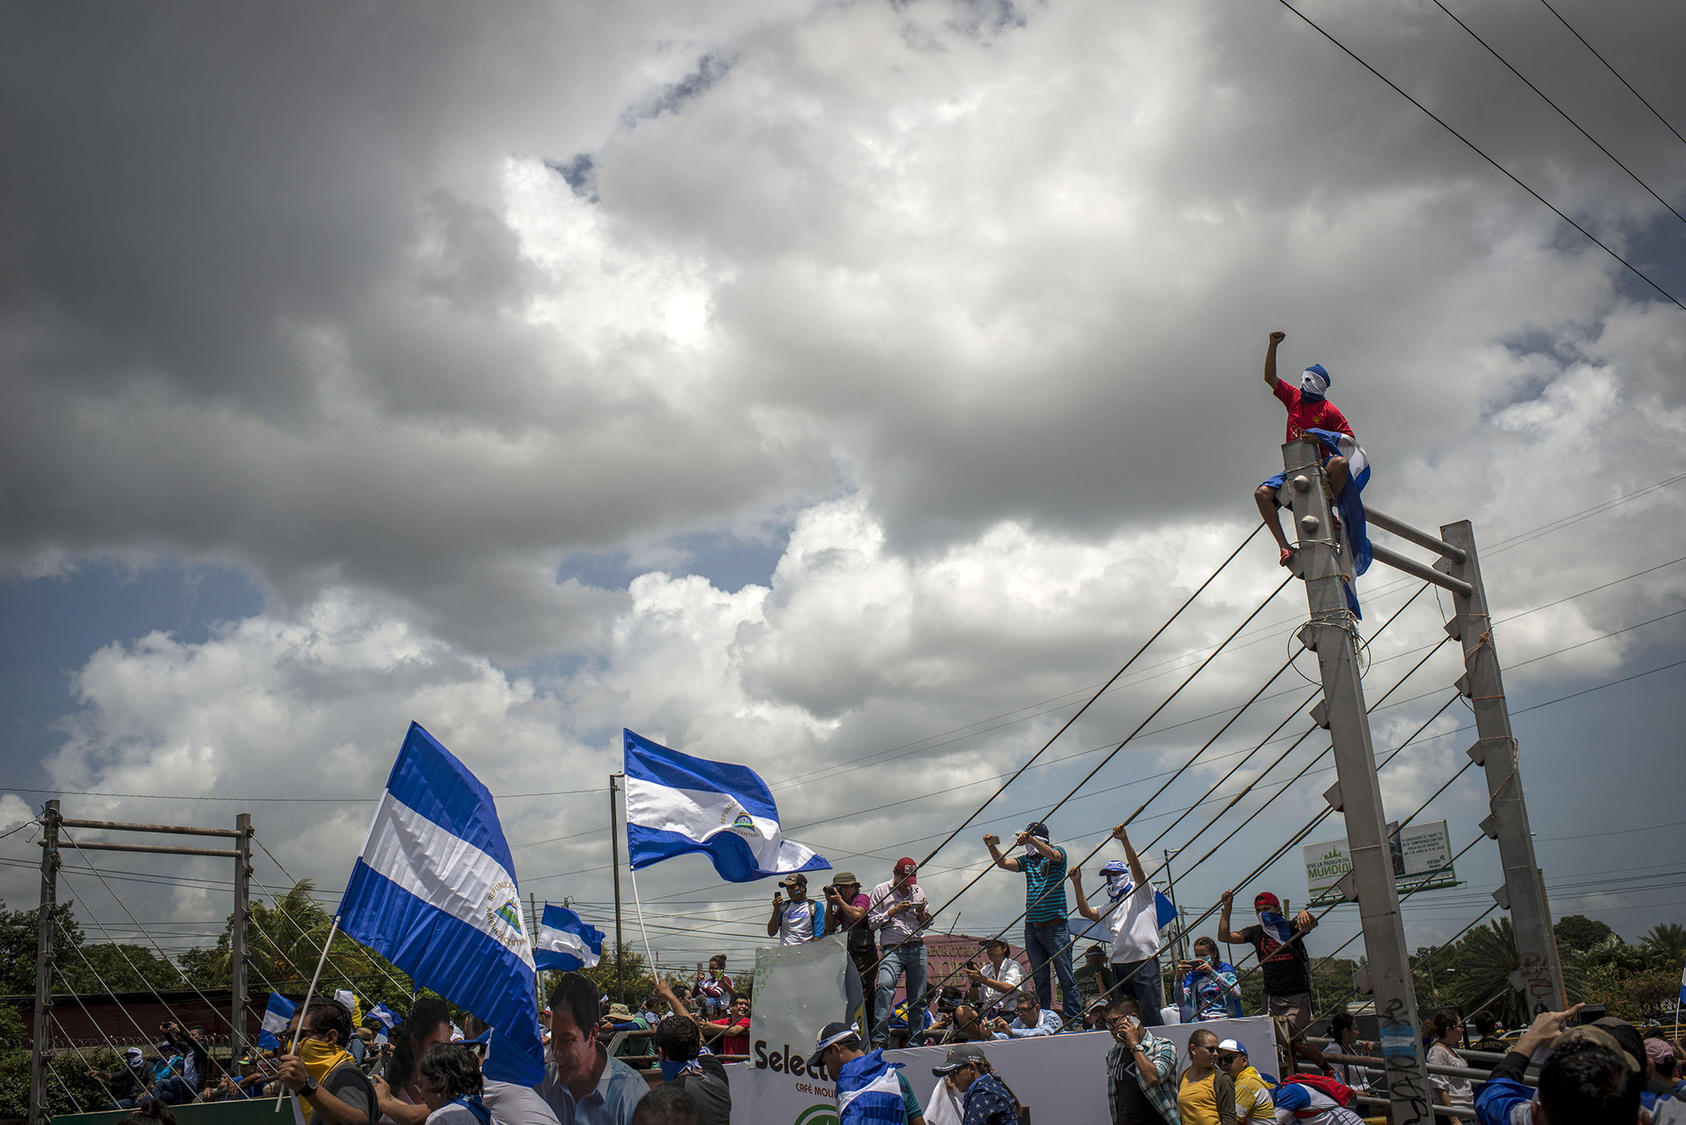 / A rally to support the Roman Catholic Church, which has been accused of supporting the opposition to President Daniel Ortega, in Managua, Nicaragua, July 28, 2018. (Daniele Volpe/The New York Times)